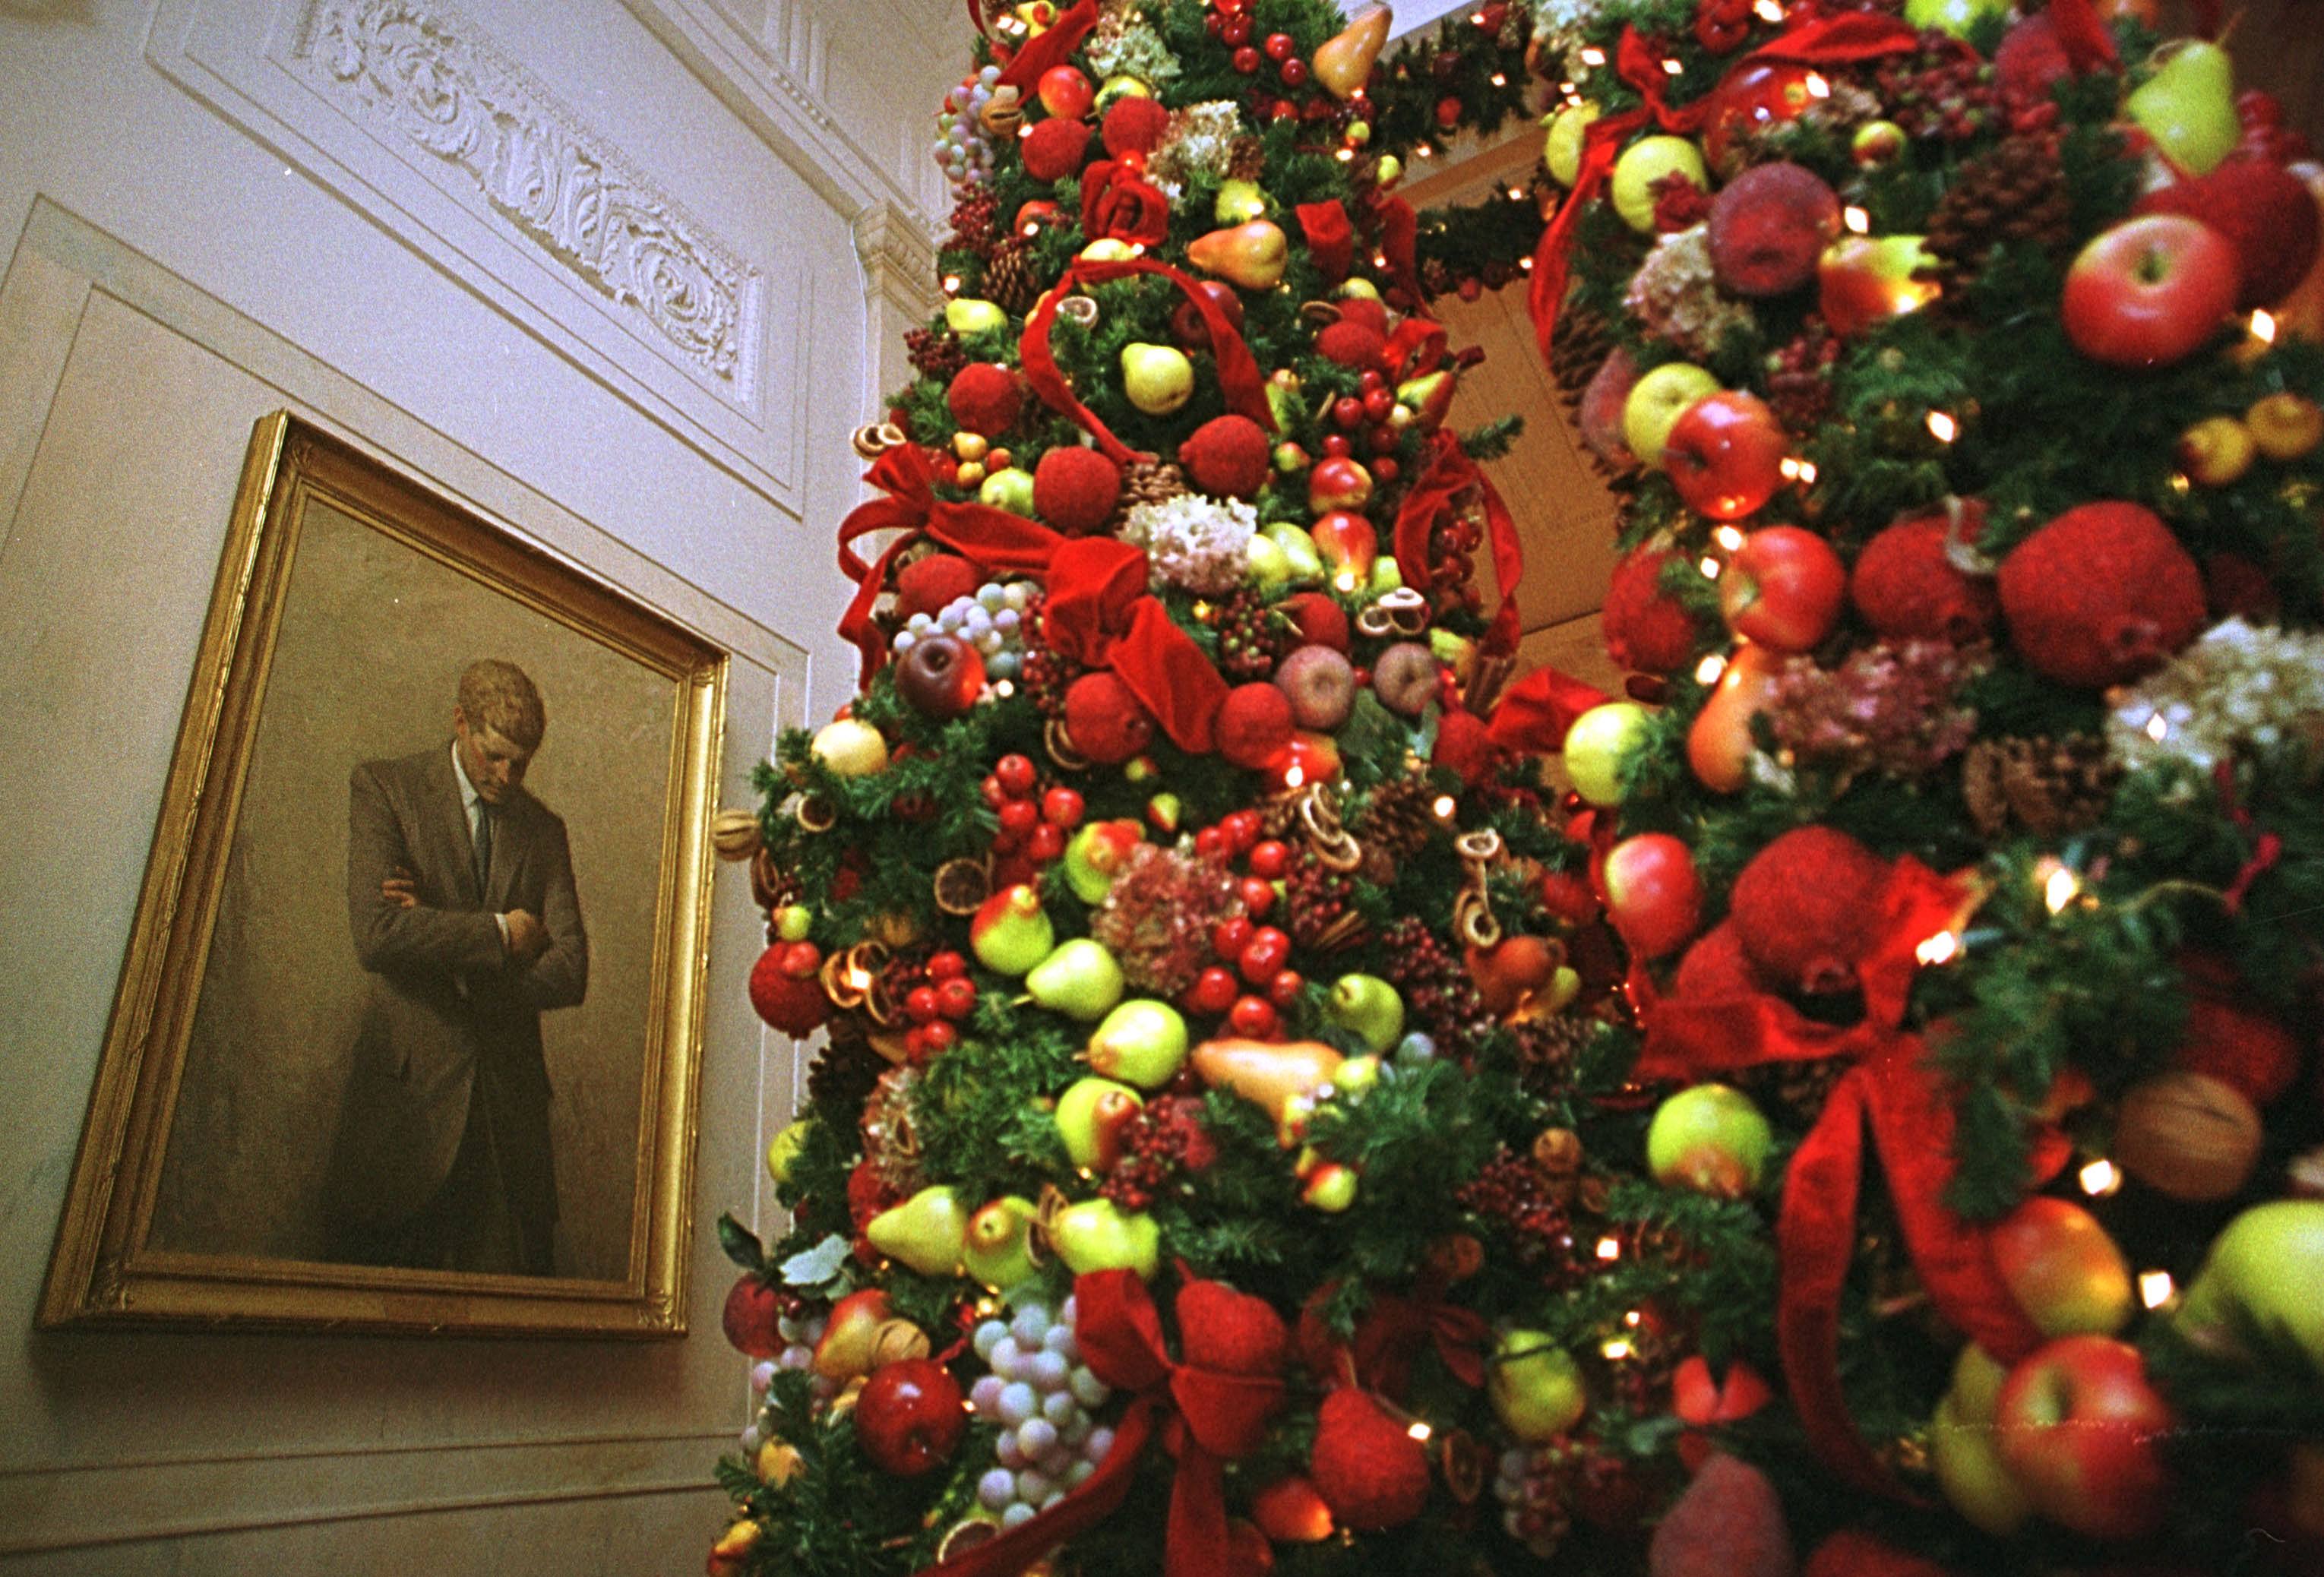 Match These White House Christmas Decorations With the Administration